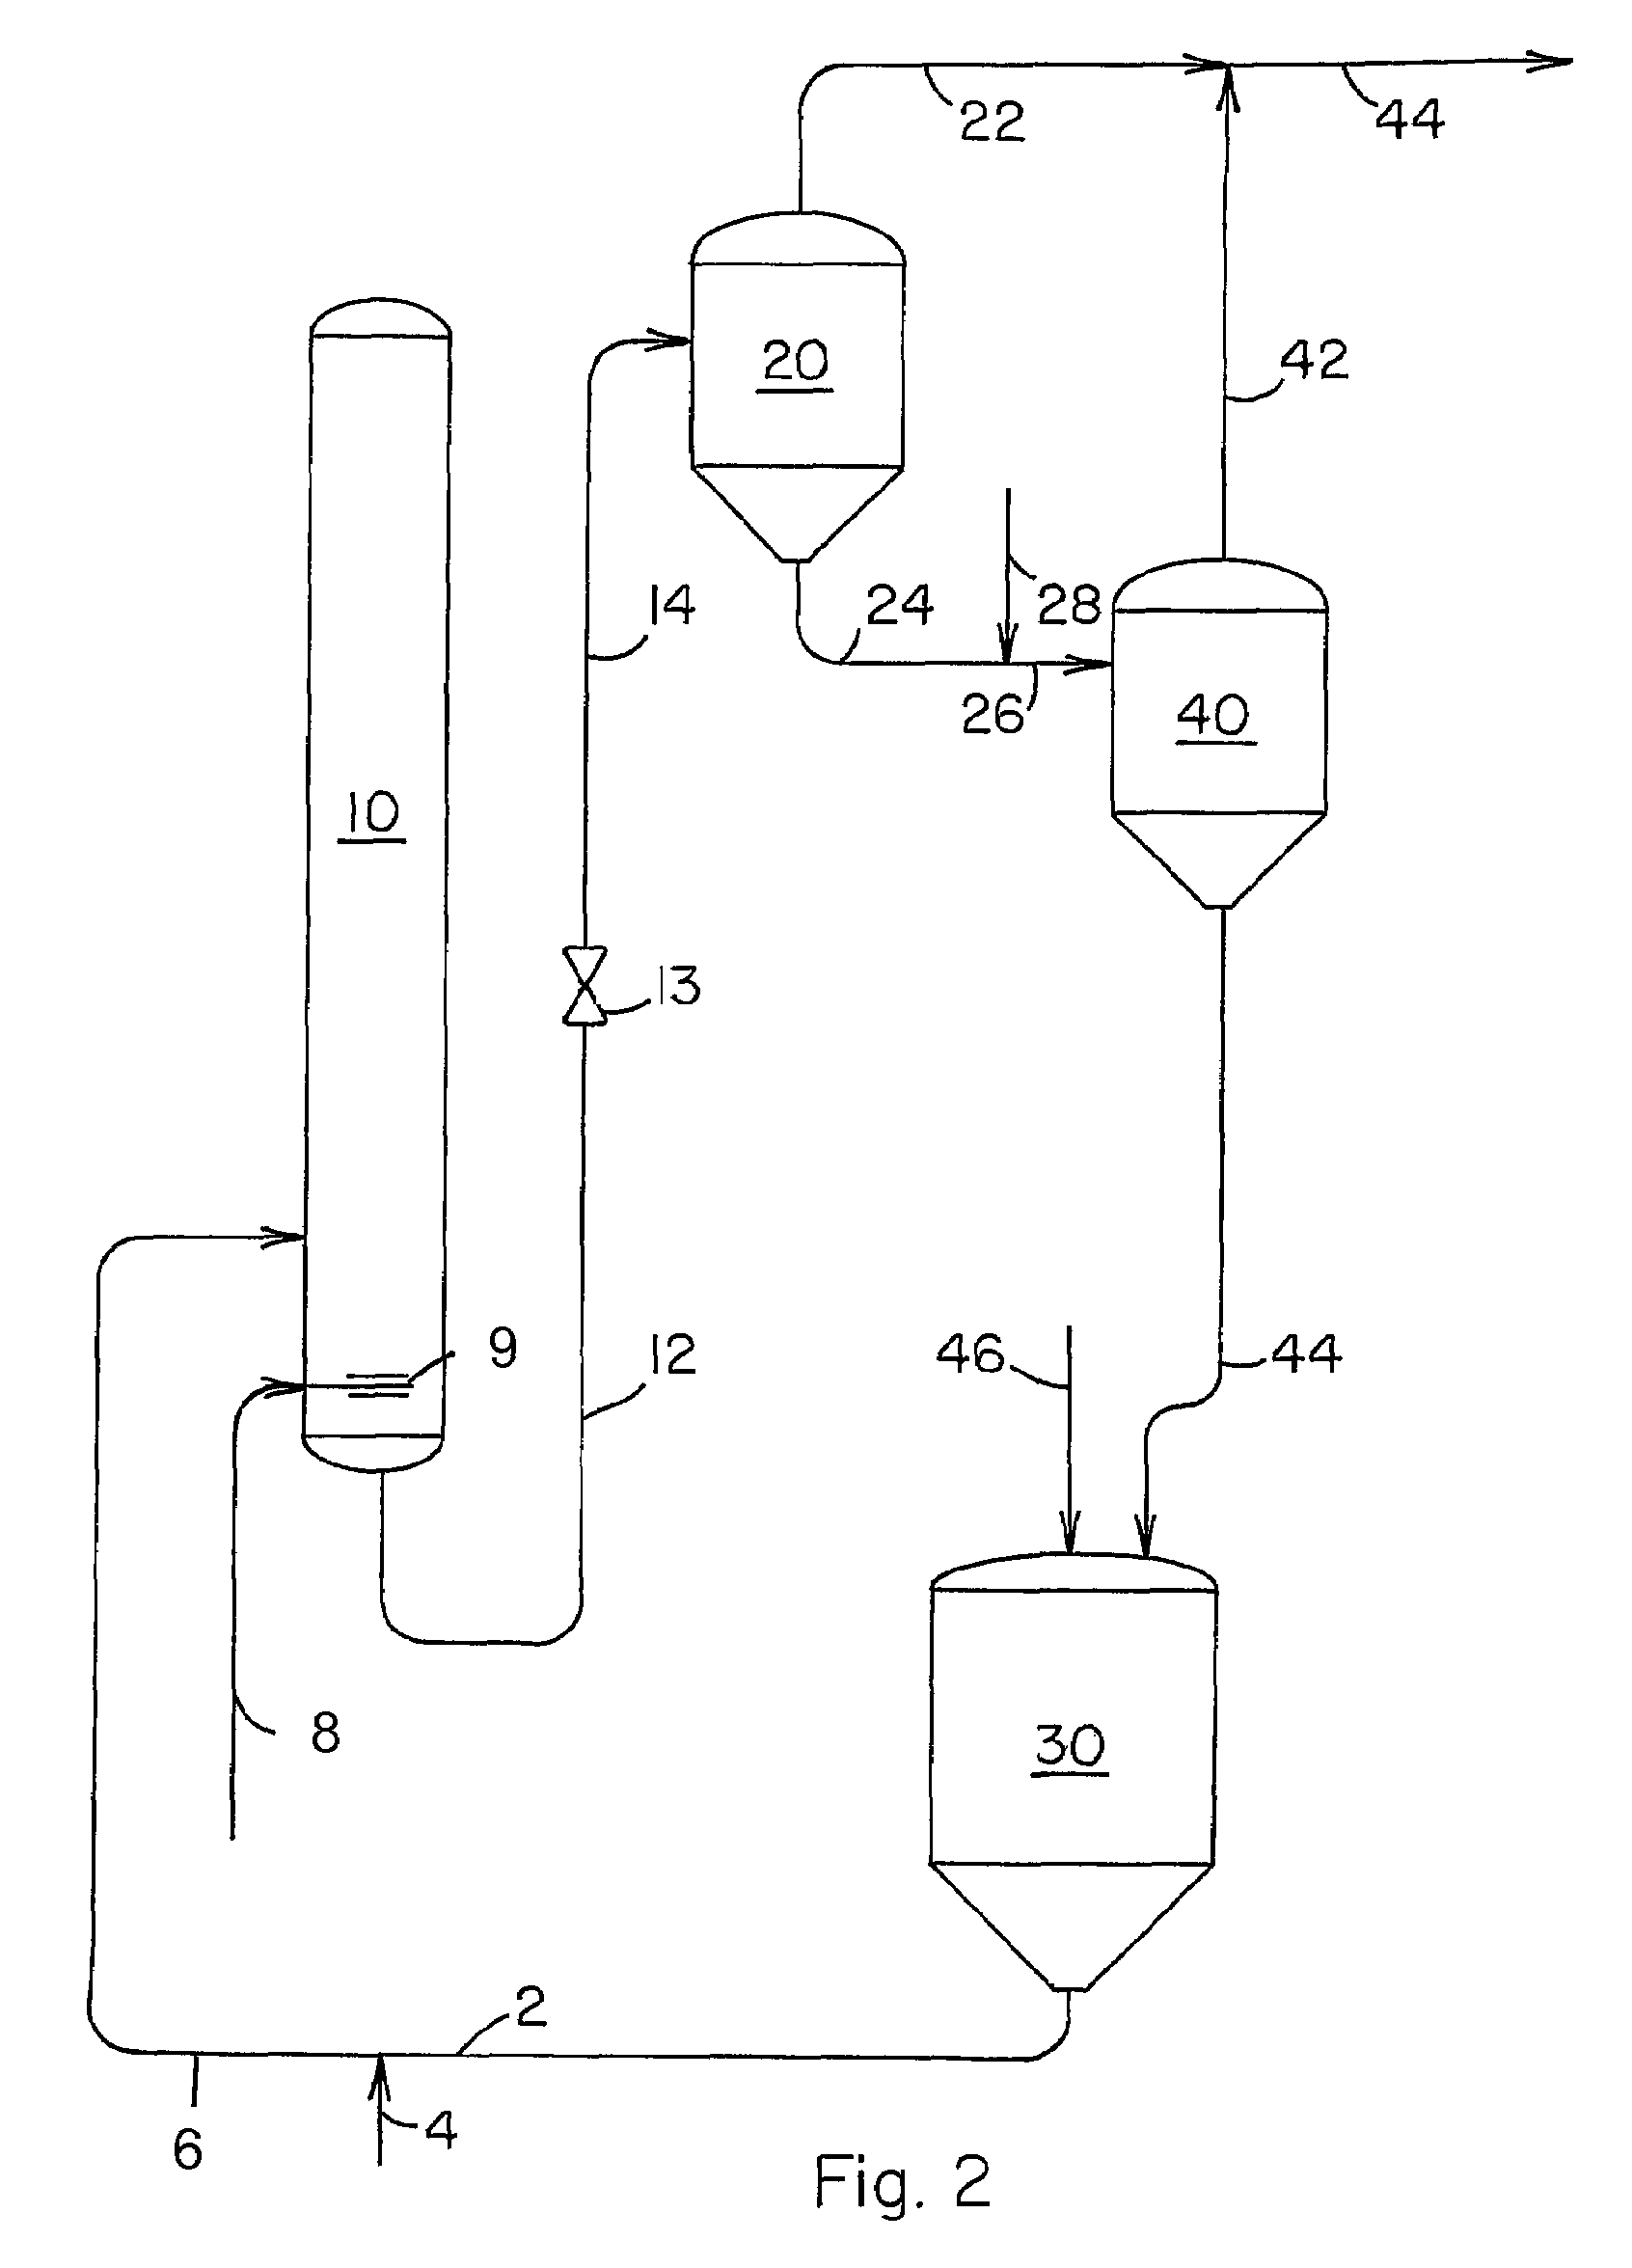 Production of acetic acid and mixtures of acetic acid and acetic anhydride